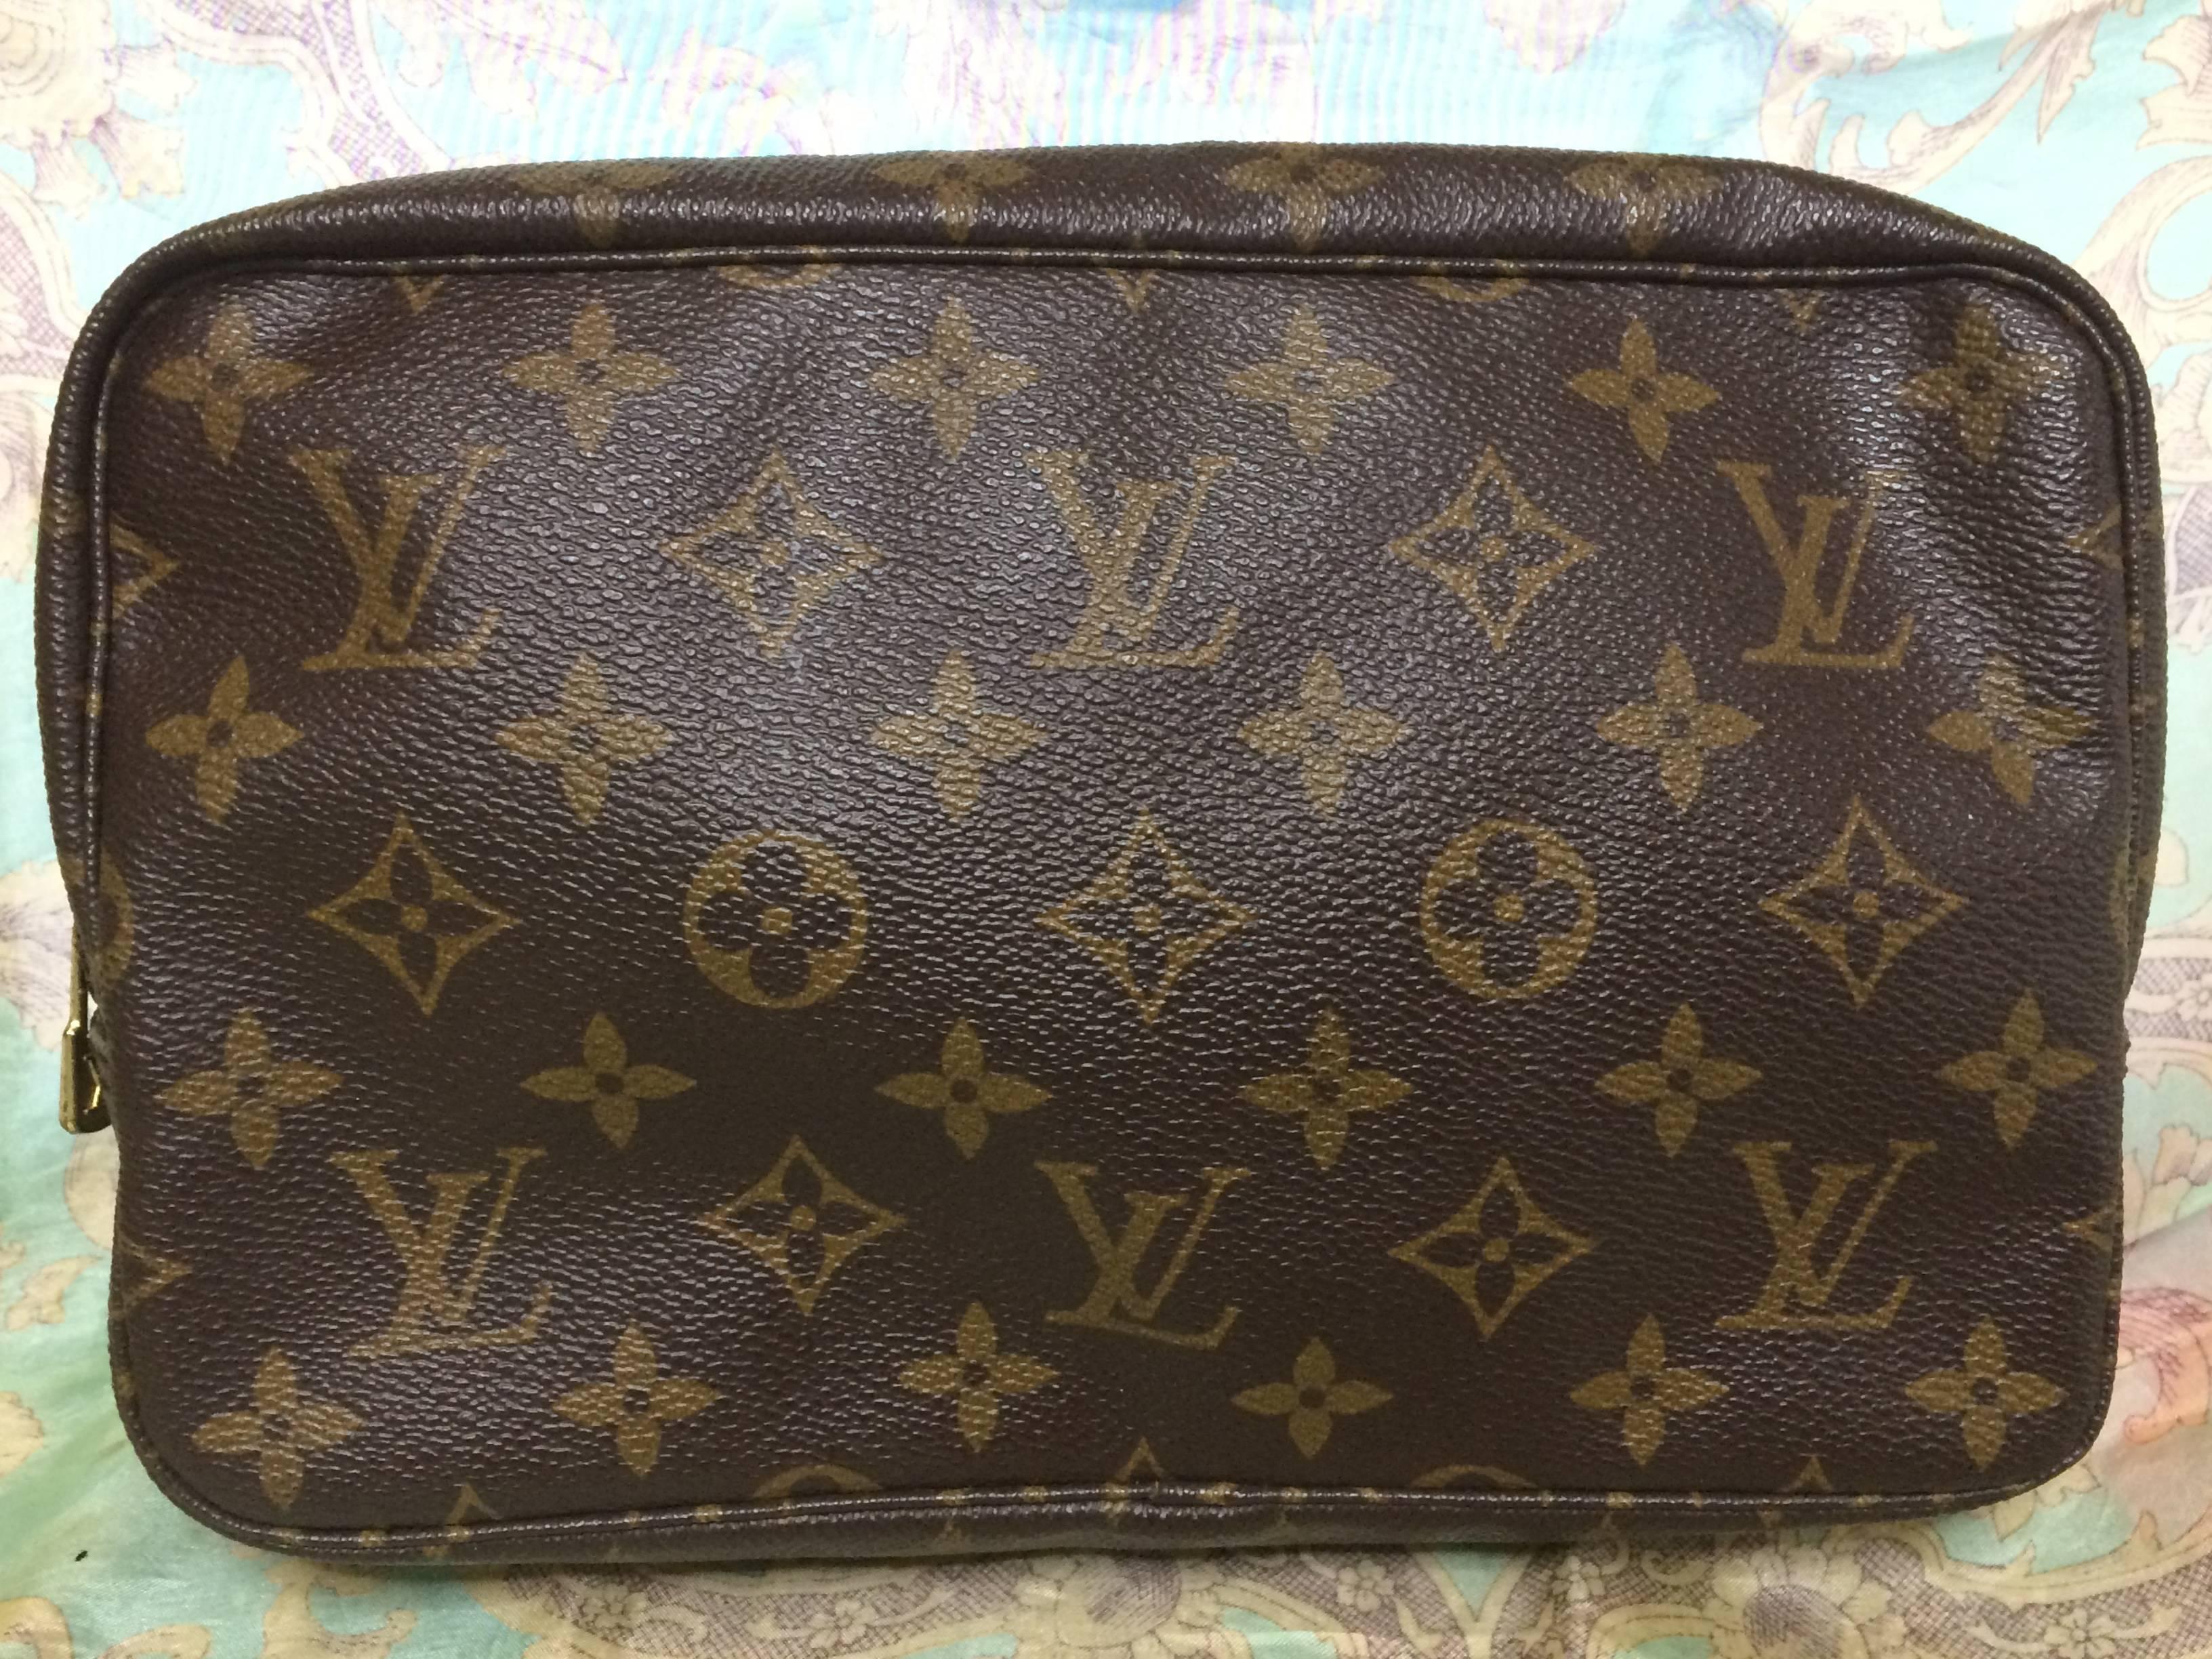 1980s. 80's Vintage Louis Vuitton classic monogram cosmetic and toilet pouch bag. Unisex use for all generations.

You are looking at the 80's Vintage Louis Vuitton monogram cosmetic/toilet pouch purse. 

Since this is very old, this doesn't